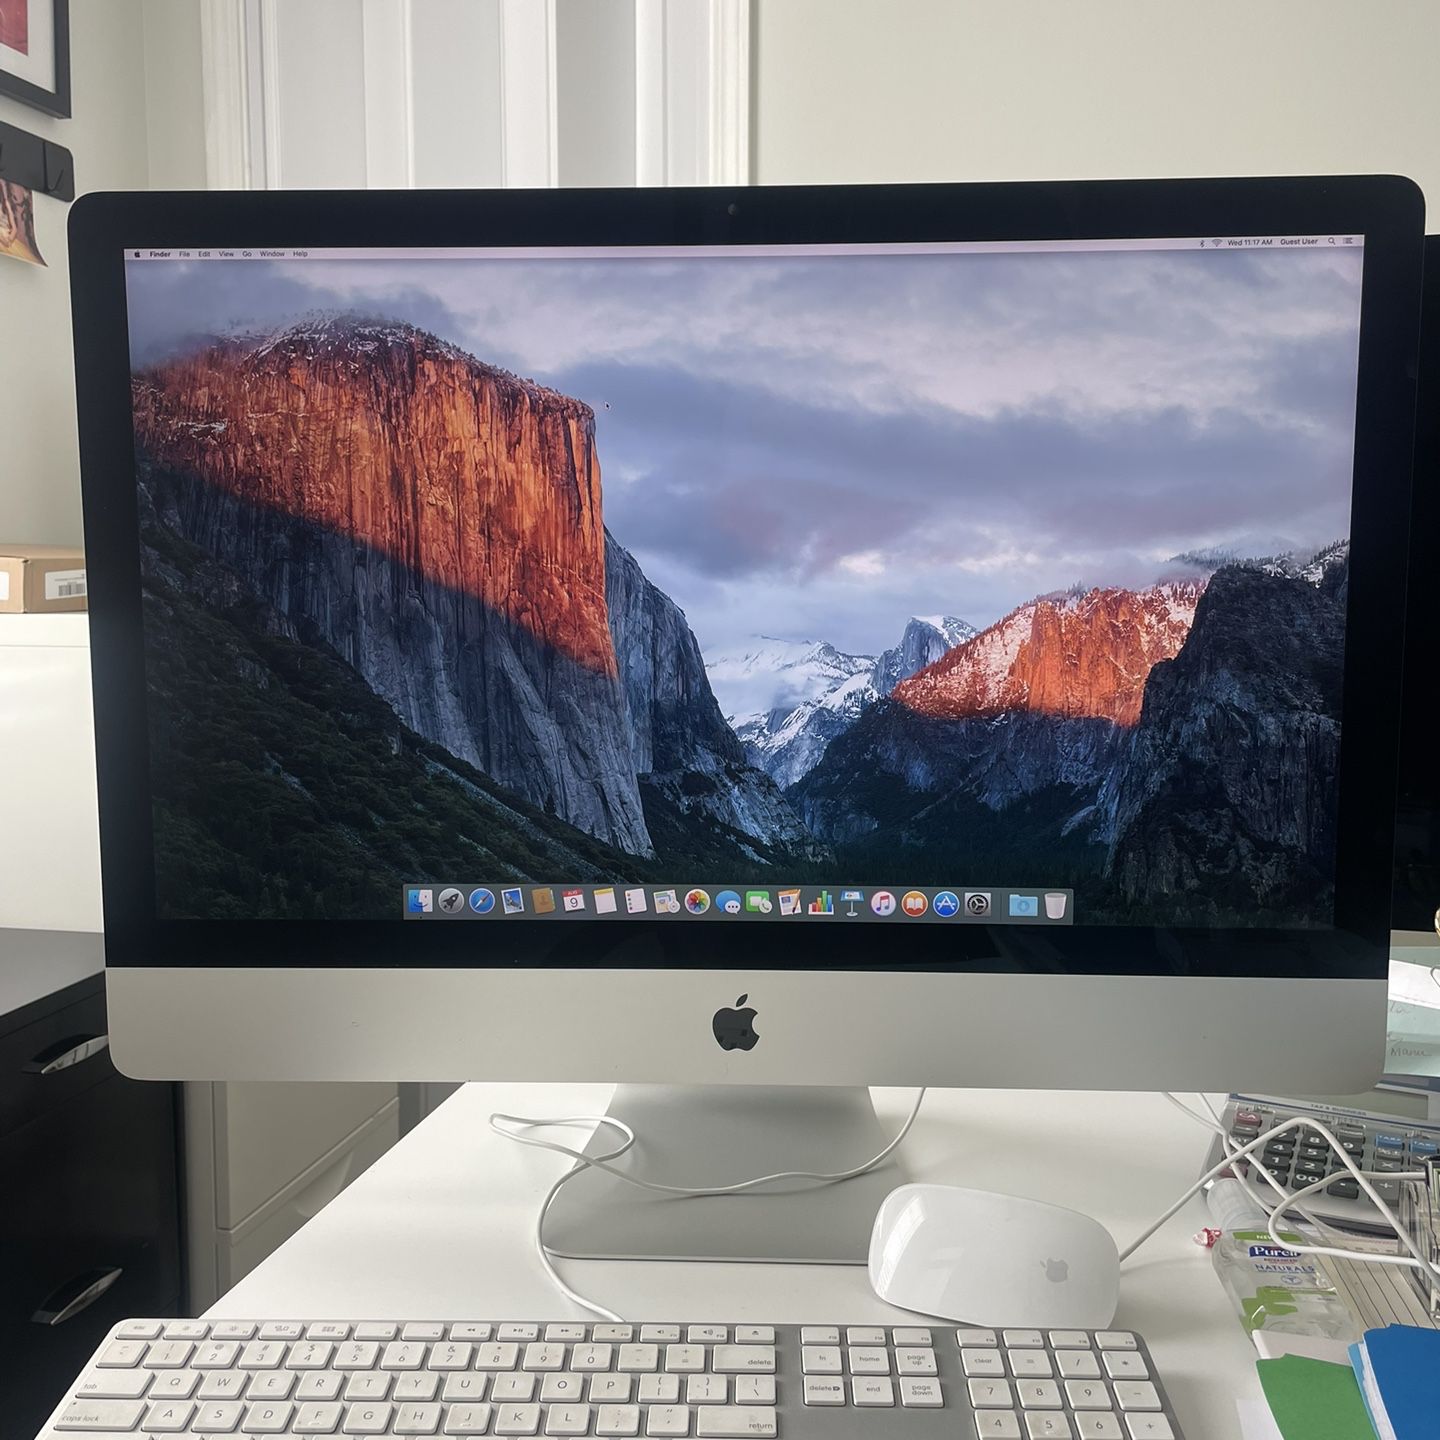 27” iMac 5k retina, 8GB ram, and 1TB SSD (with keyboard and mouse)